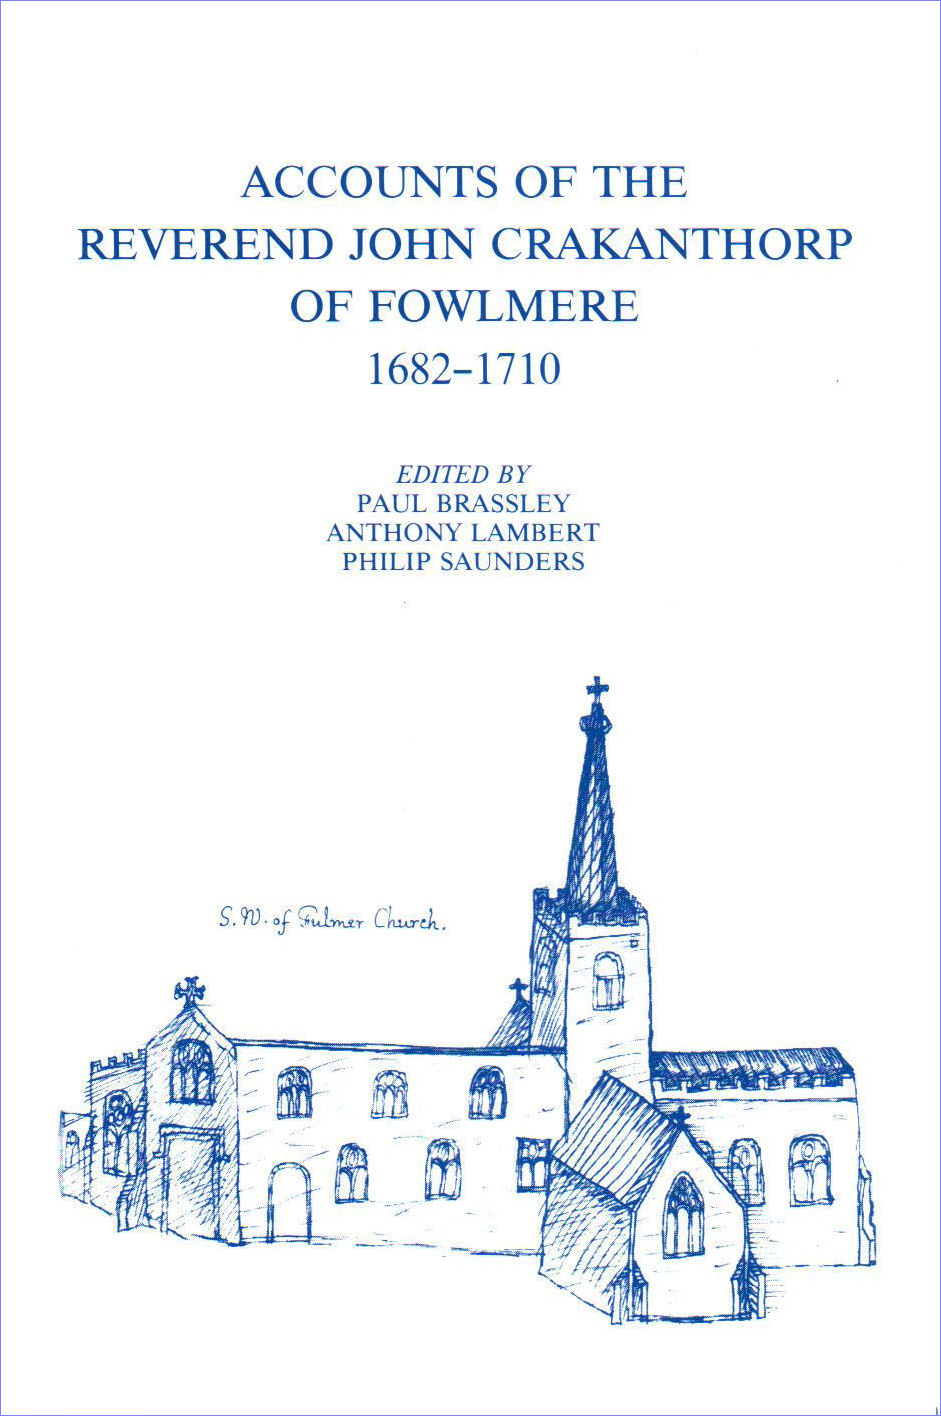 8. Accounts of the Reverend John Crakanthorp of Fowlmere, 1682-1710. Edited by Paul Brassley, Anthony Lambert and Philip Saunders.